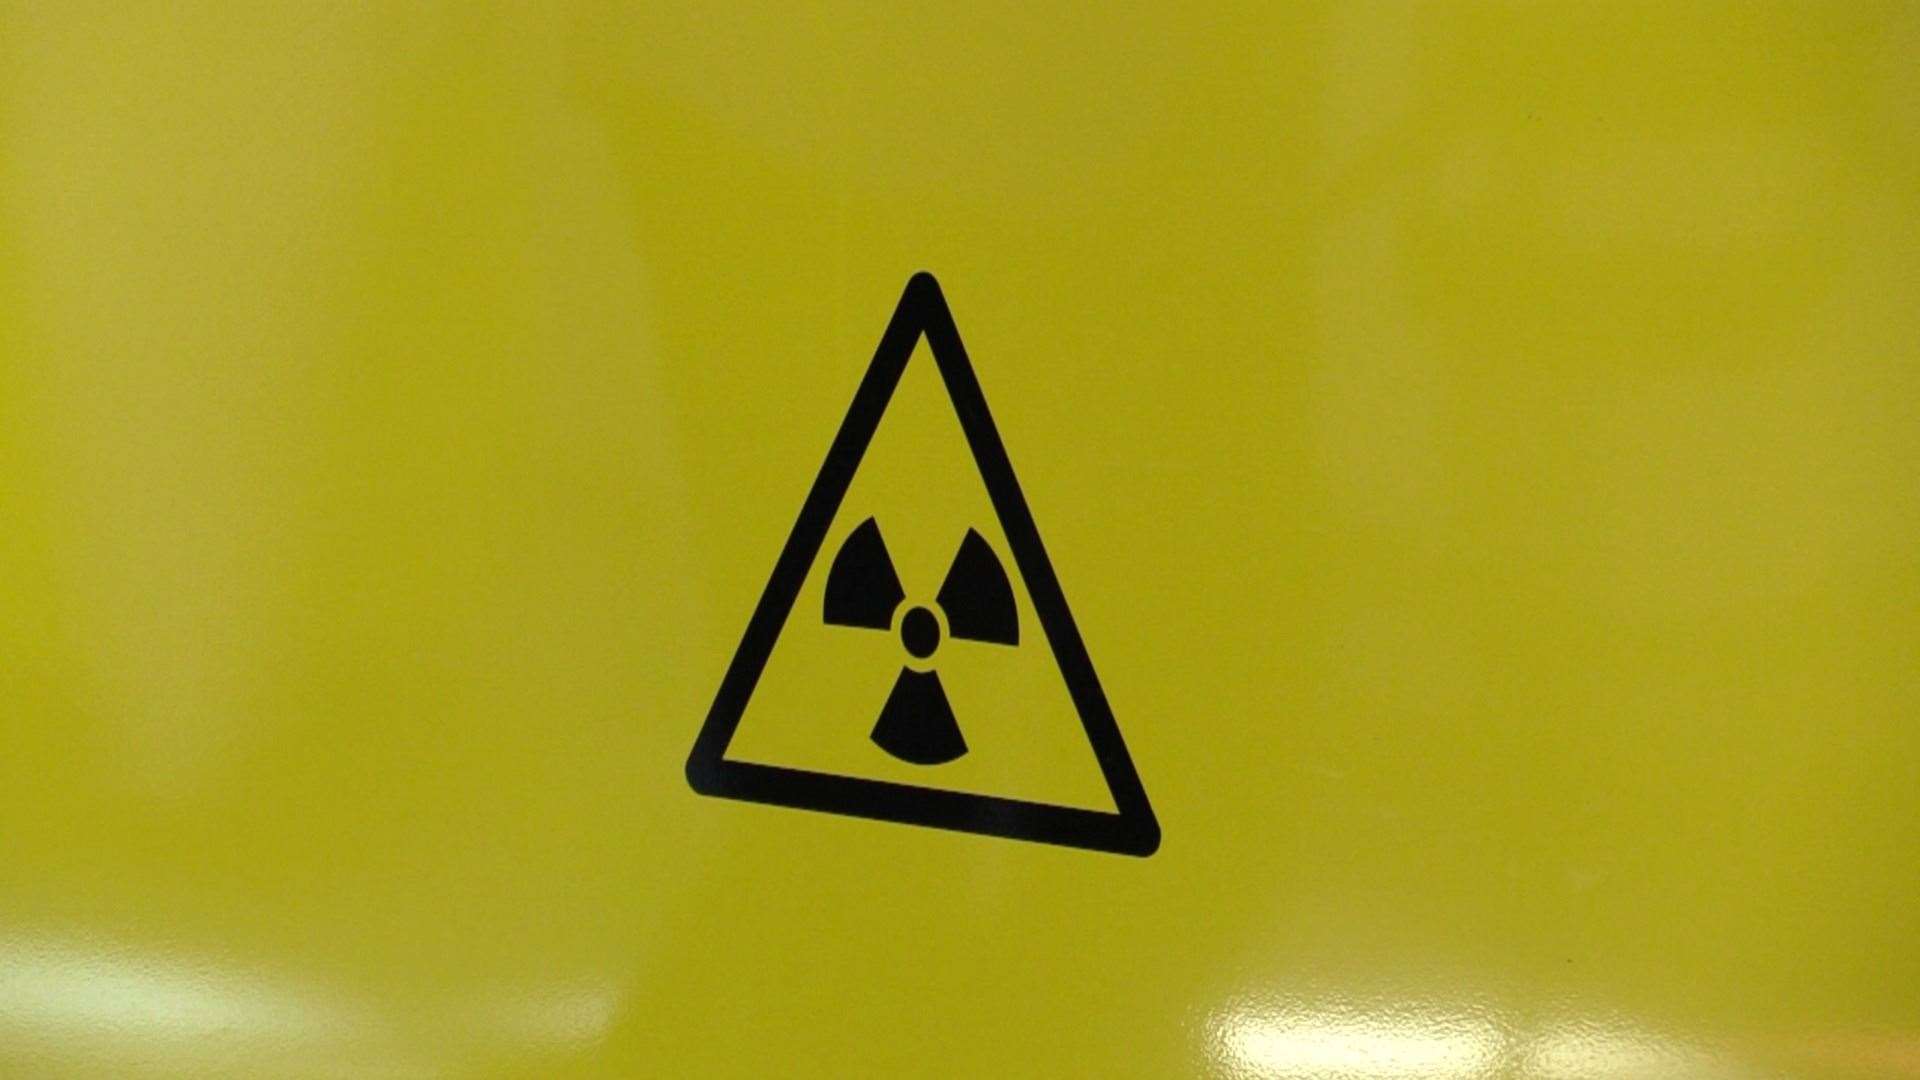 Unsurprisingly, this sign made a frequent appearance inside the power station